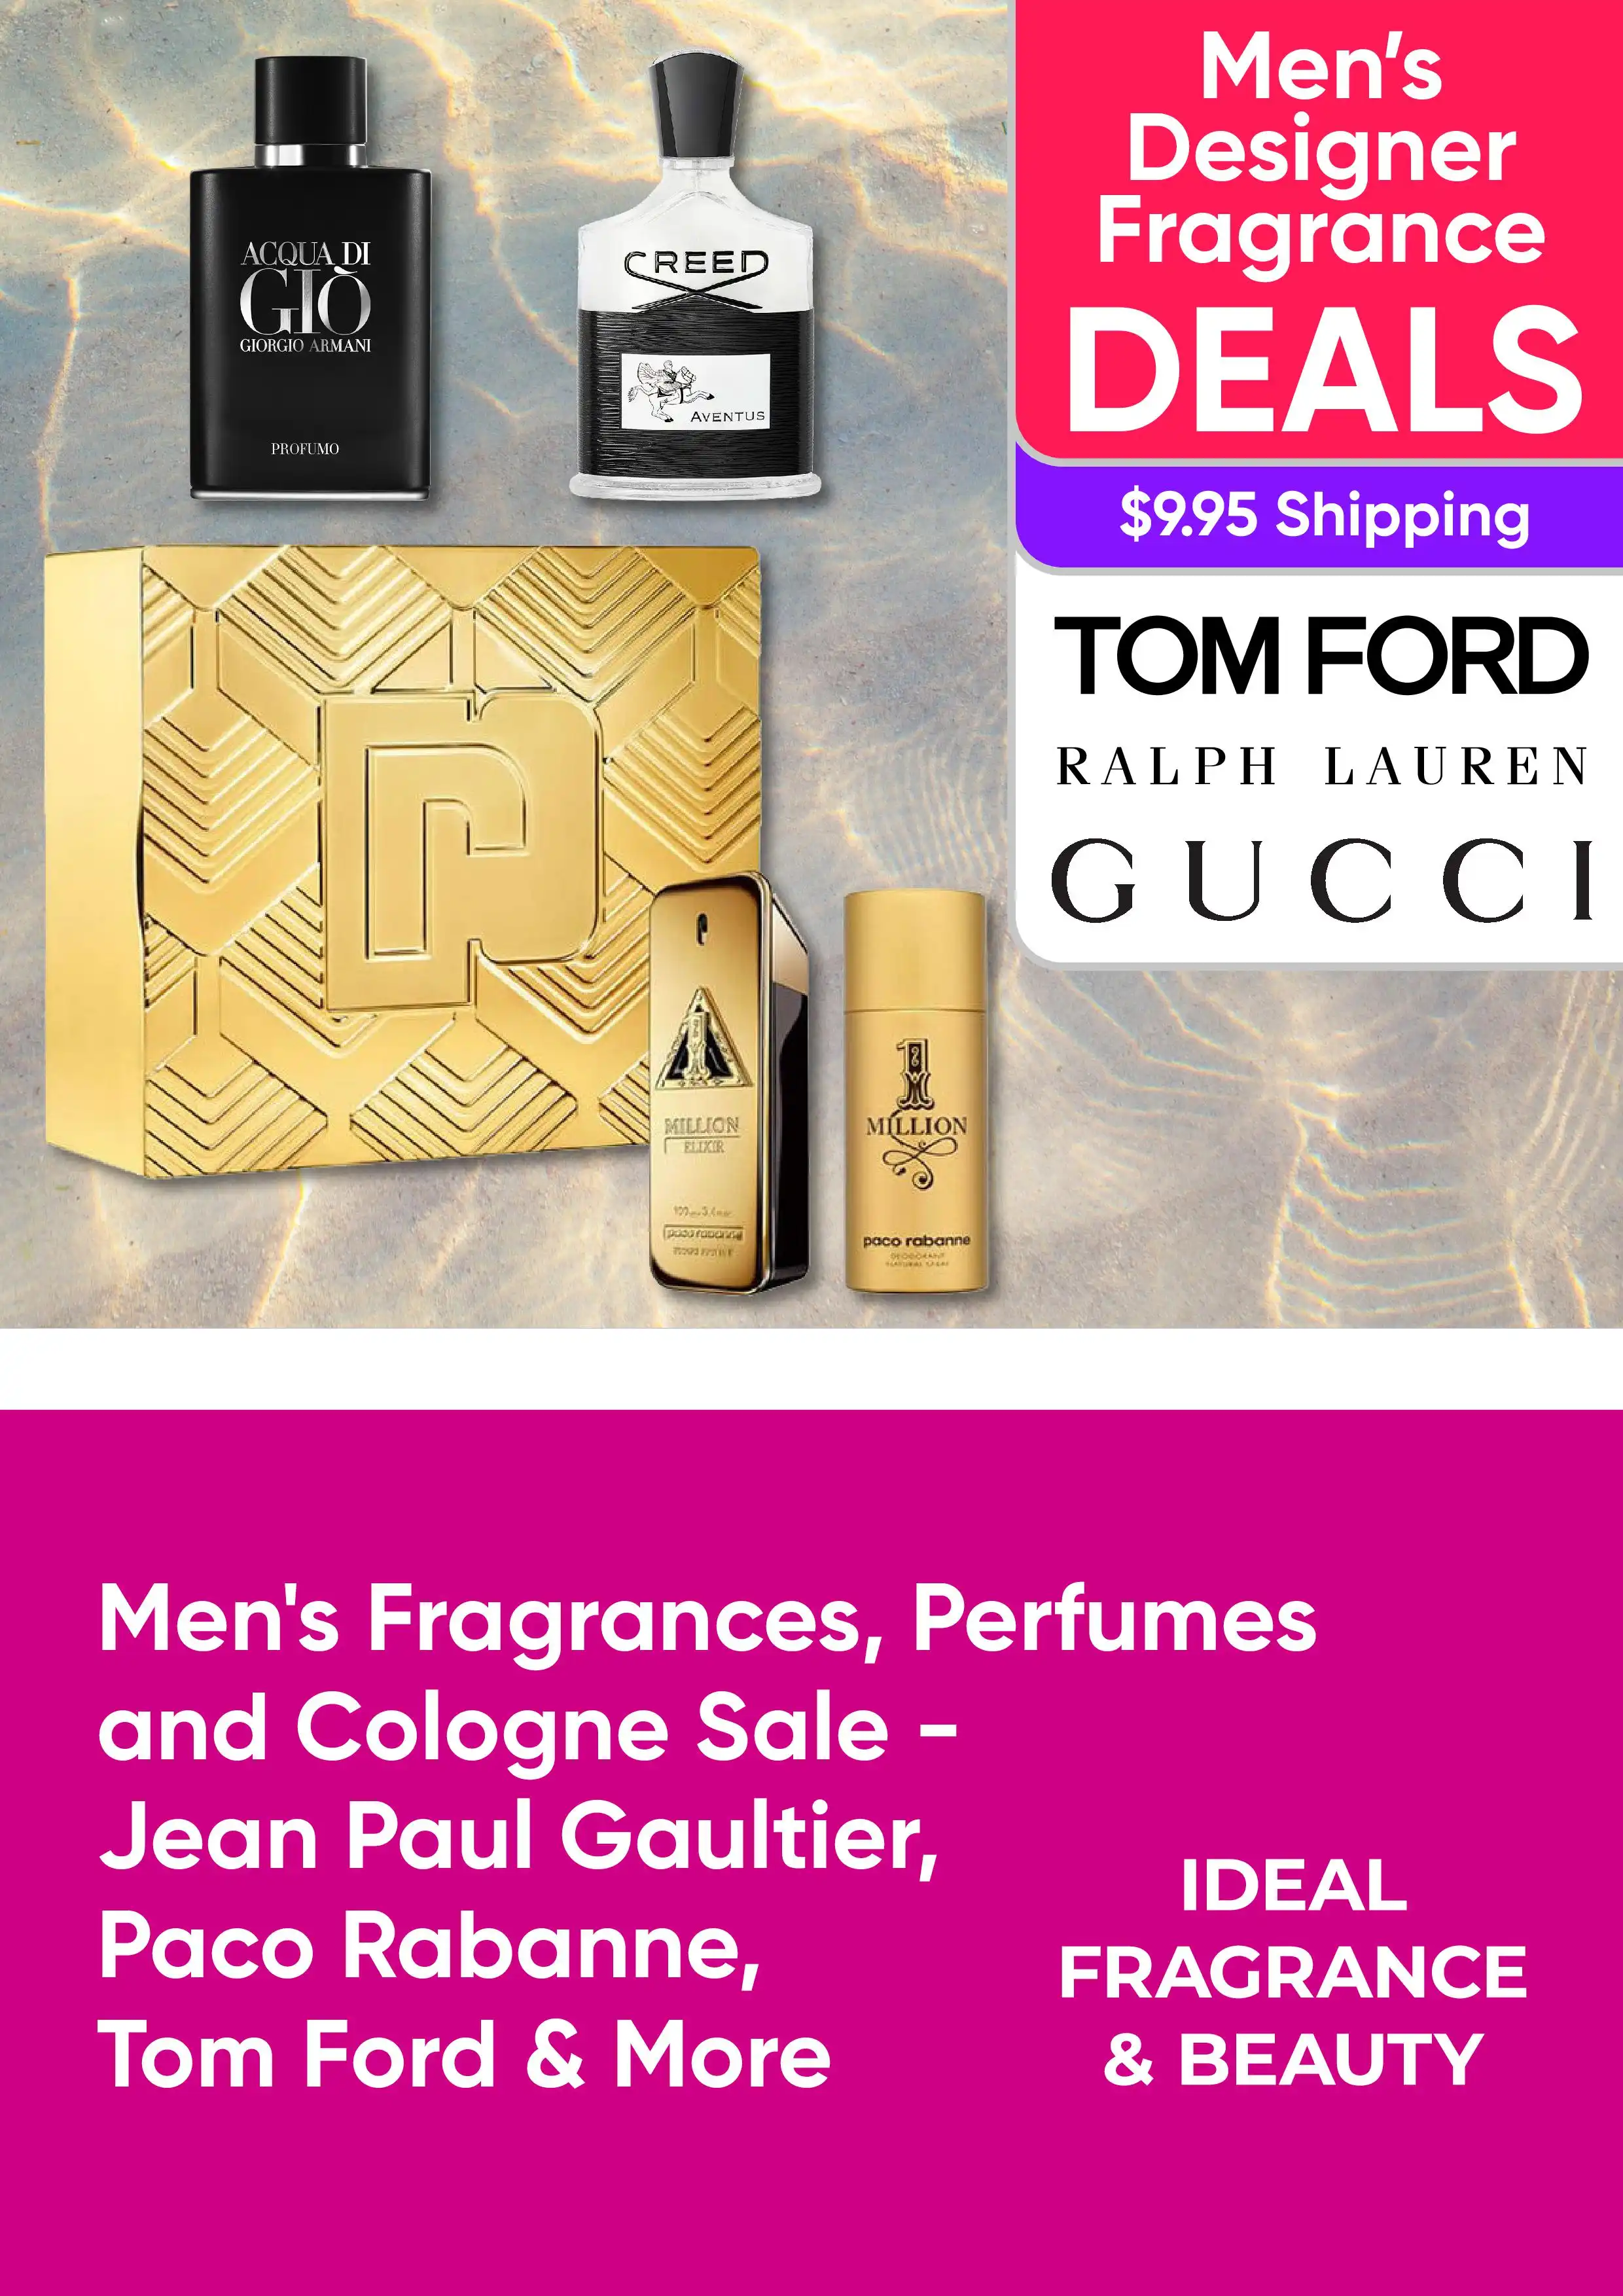 Men's Fragrances, Perfumes and Cologne Sale - Jean Paul Gaultier, Paco Rabanne, Tom Ford and More